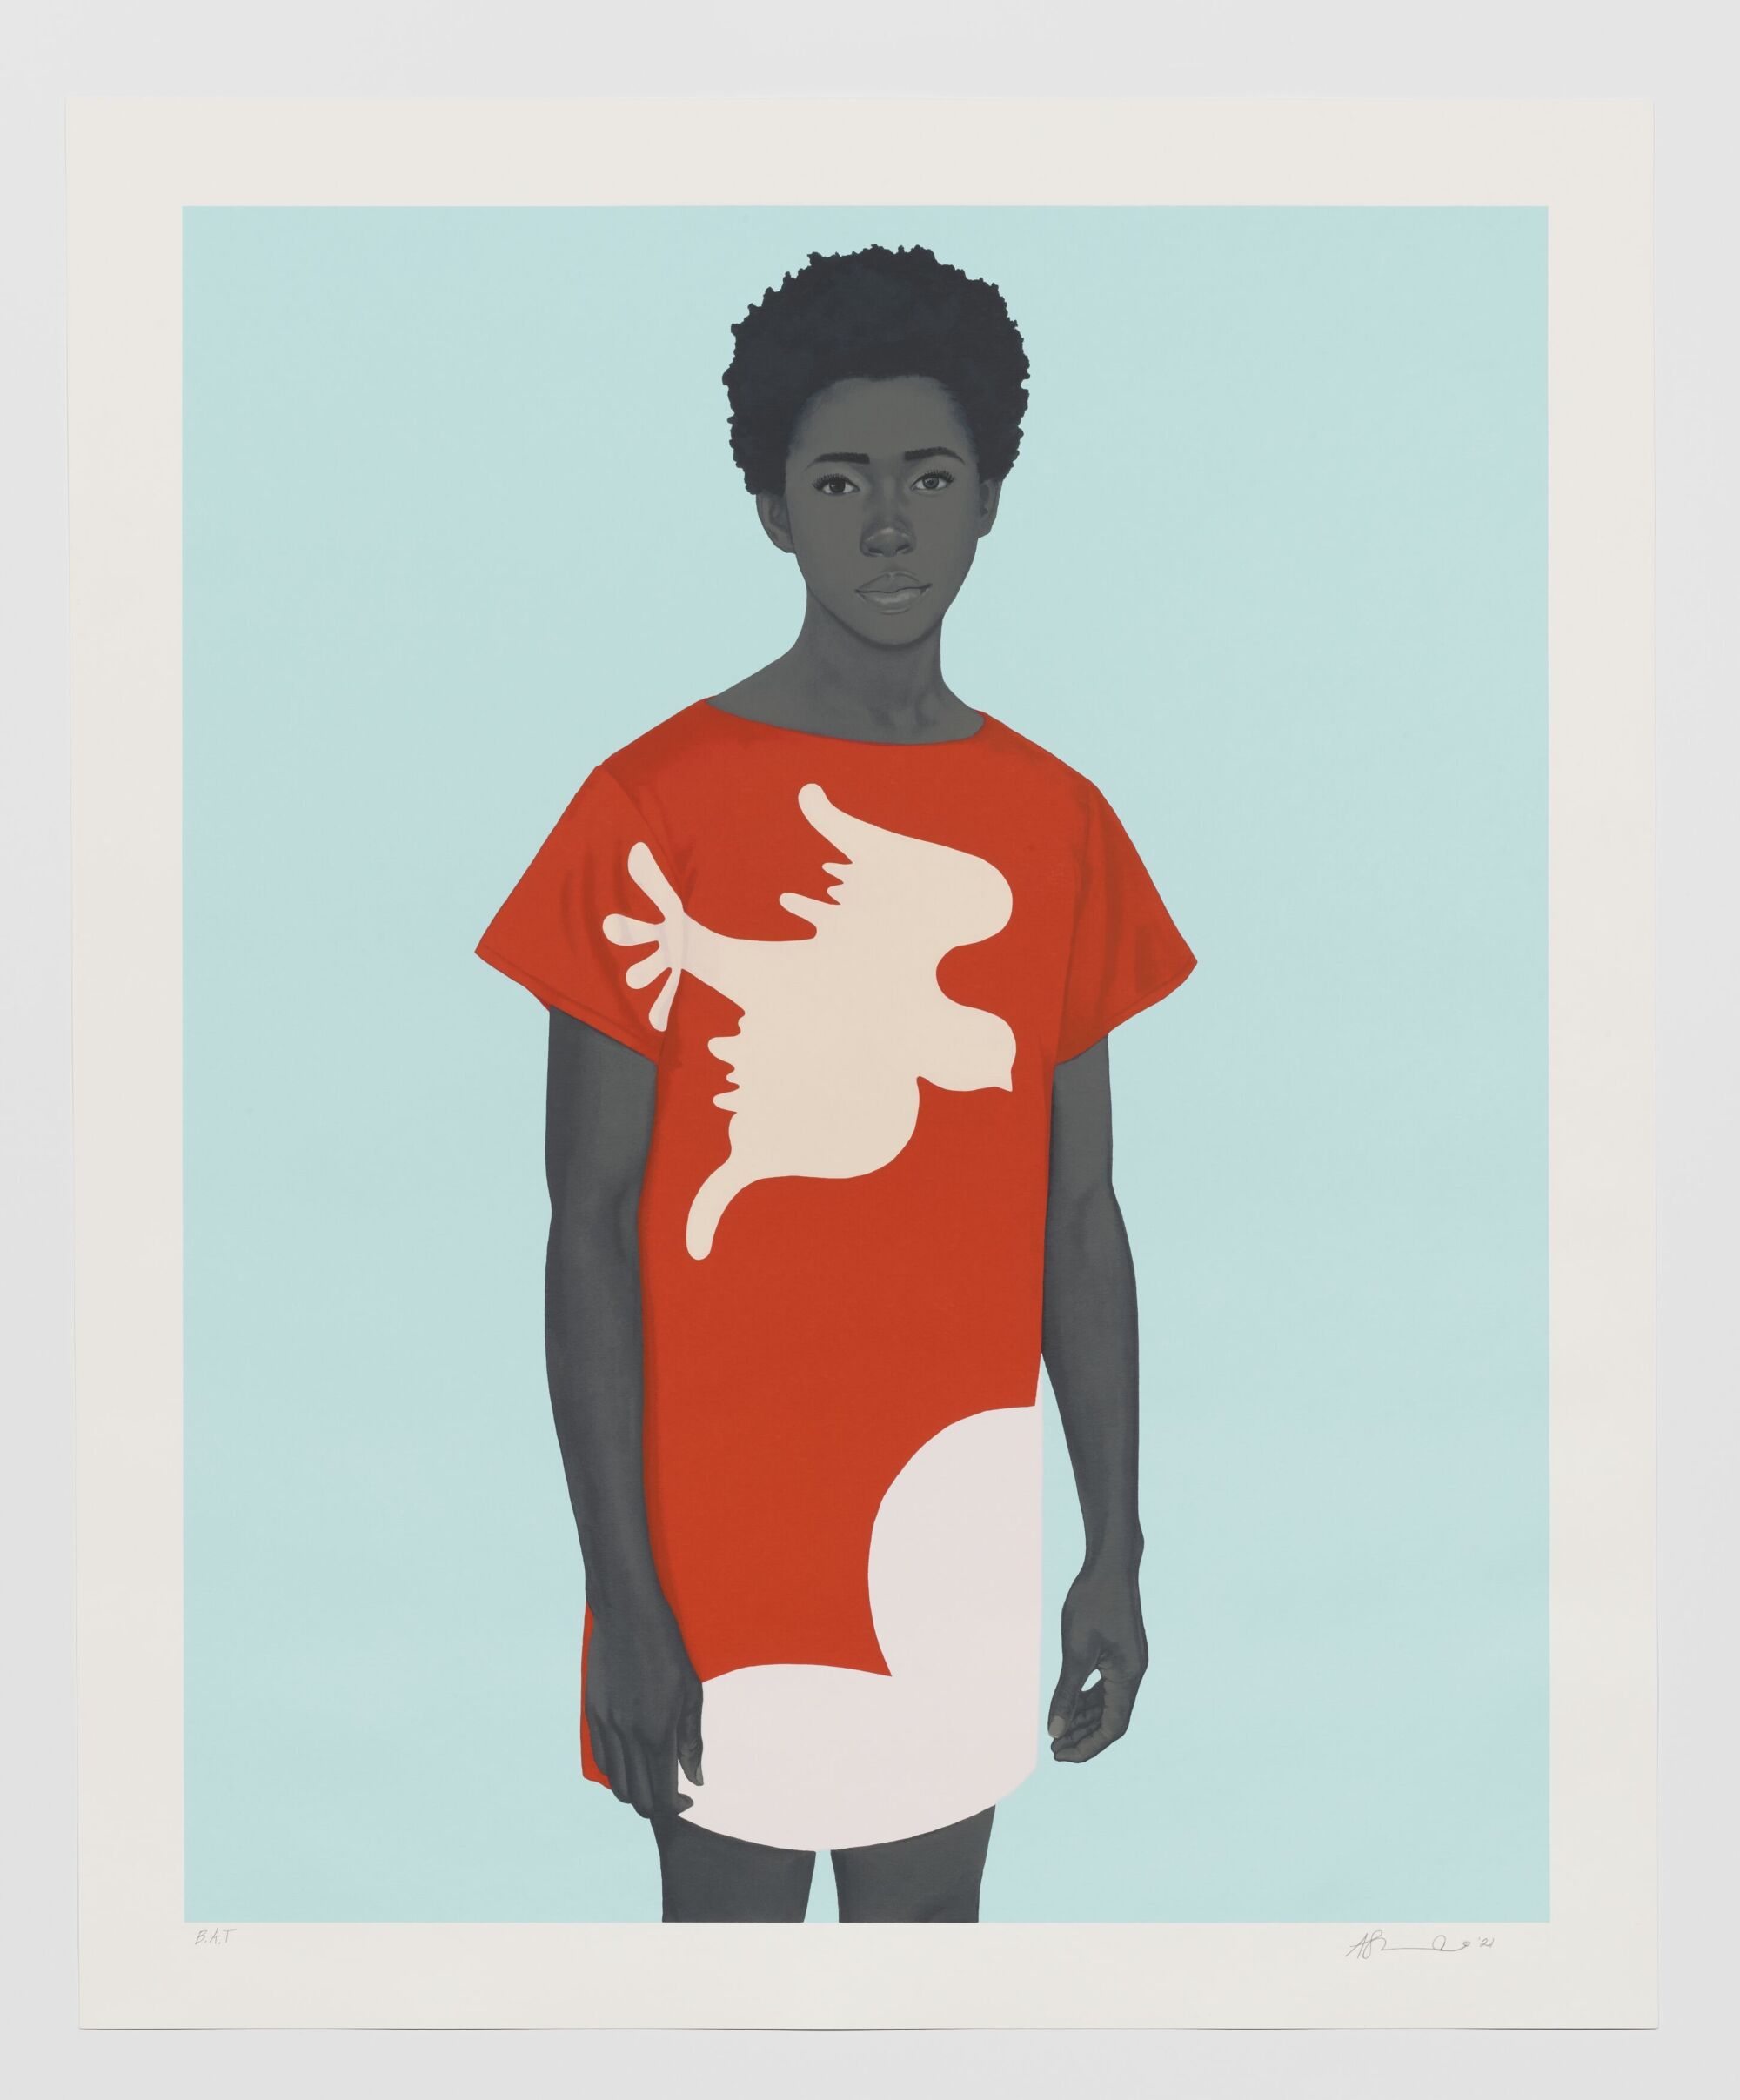 The Wick - Amy Sherald
Hope is the thing with feathers (The little bird)
2021
Color screenprint on Coventry Rag 335 gsm
Image: 102.23 x 81.28 cm / 40 1/4 x 32 inches
Paper: 114.93 x 93.98 cm / 45 1/4 x 37 inches
© Amy Sherald
Courtesy the artist and Hauser & Wirth
Photo: Thomas Barratt
